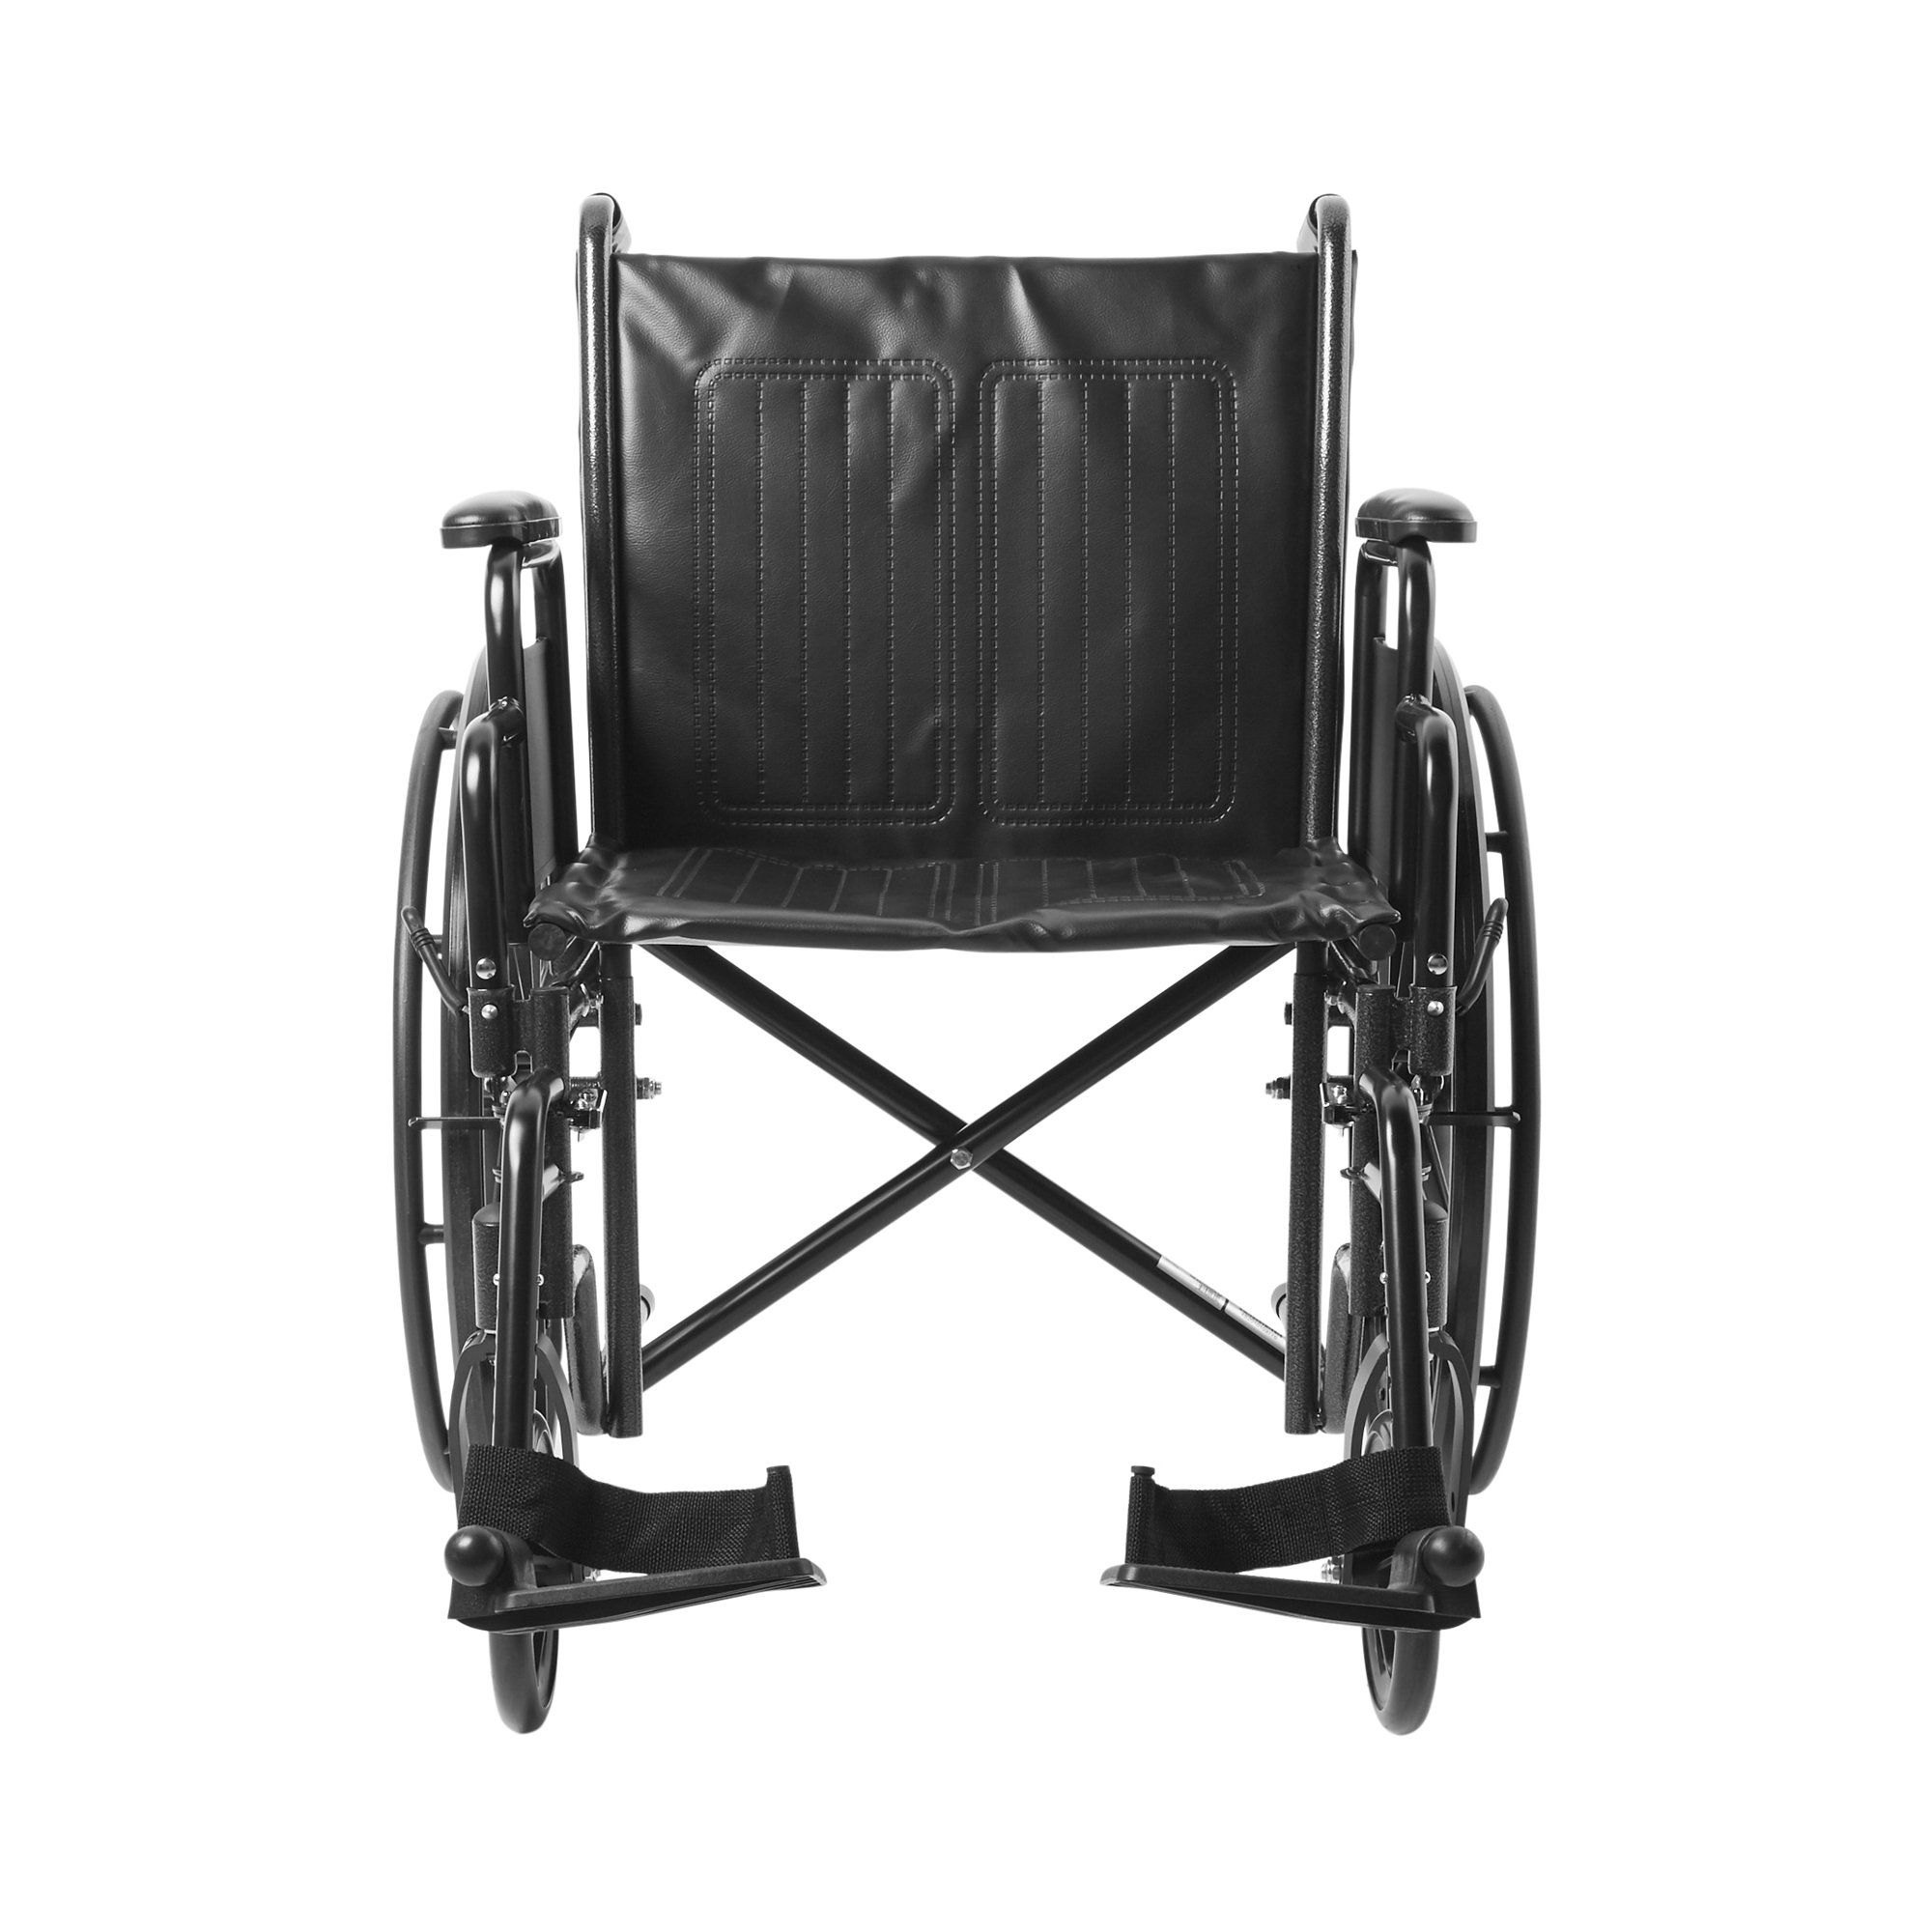 McKesson Wheelchair with Swing-Away Footrests & Detachable Arms - 350 lbs Weight Capacity